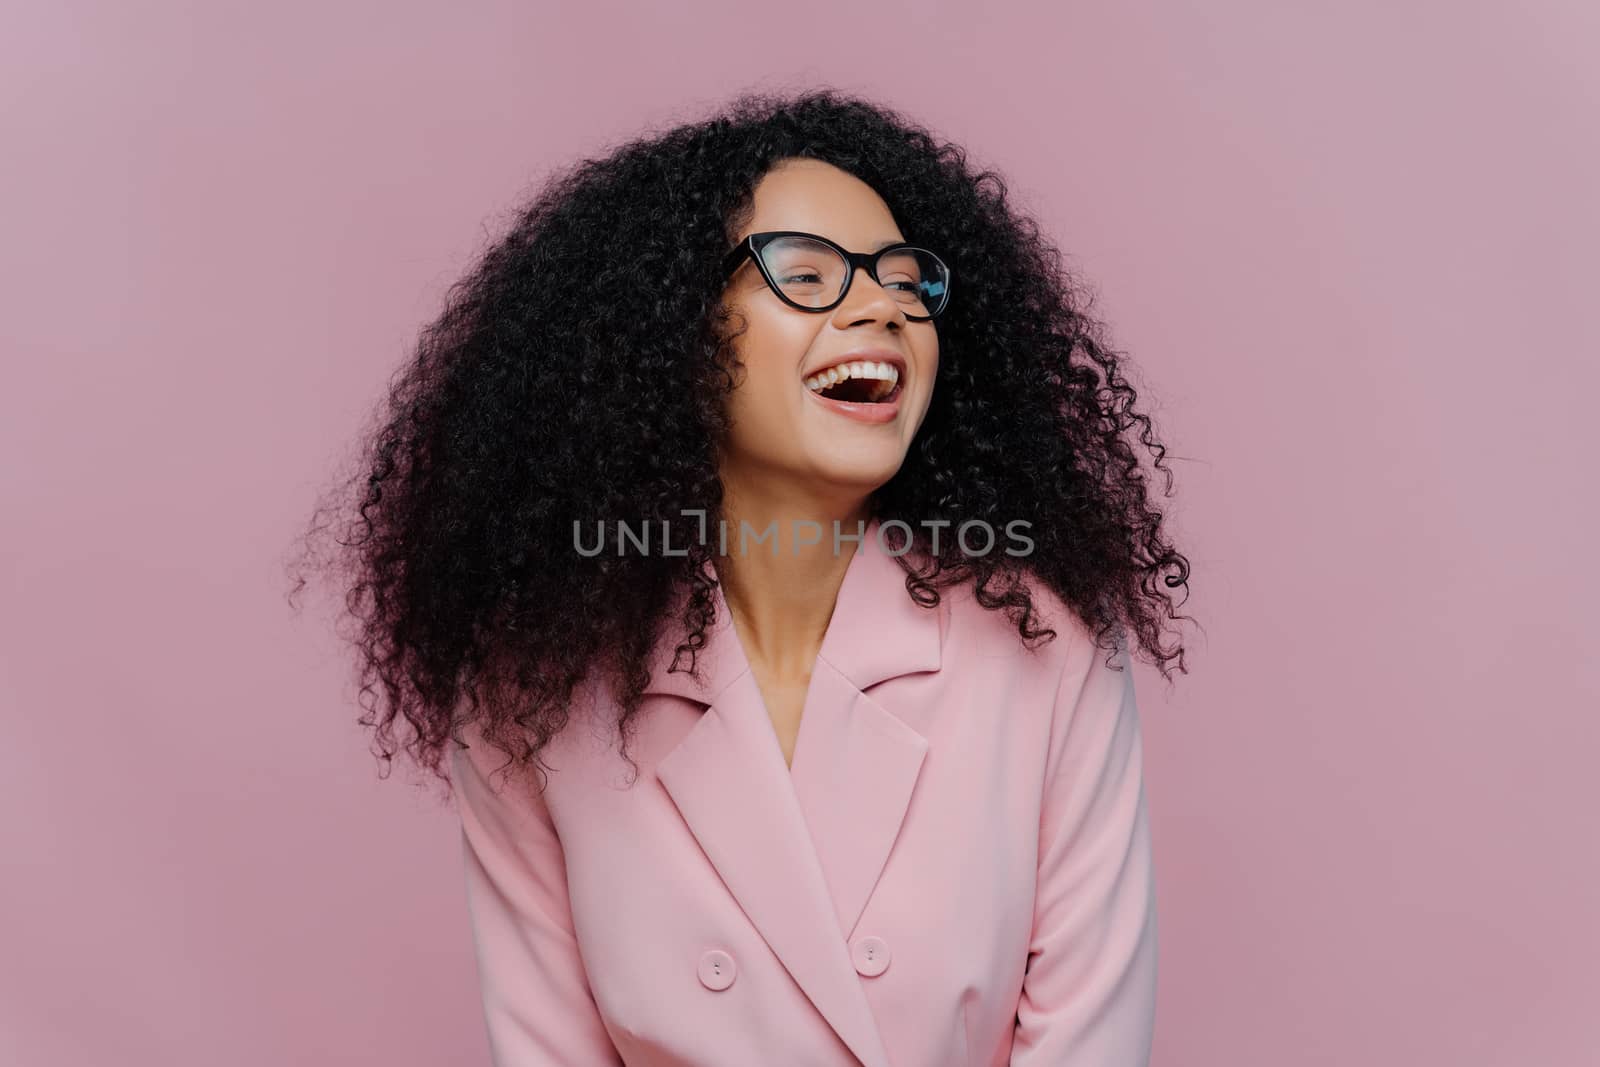 Joyous overjoyed dark skinned female manager has frizzy curly hair, laughs with happiness, wears elegant costume, transparent glasses, focused away, poses over purple background. Emotions concept